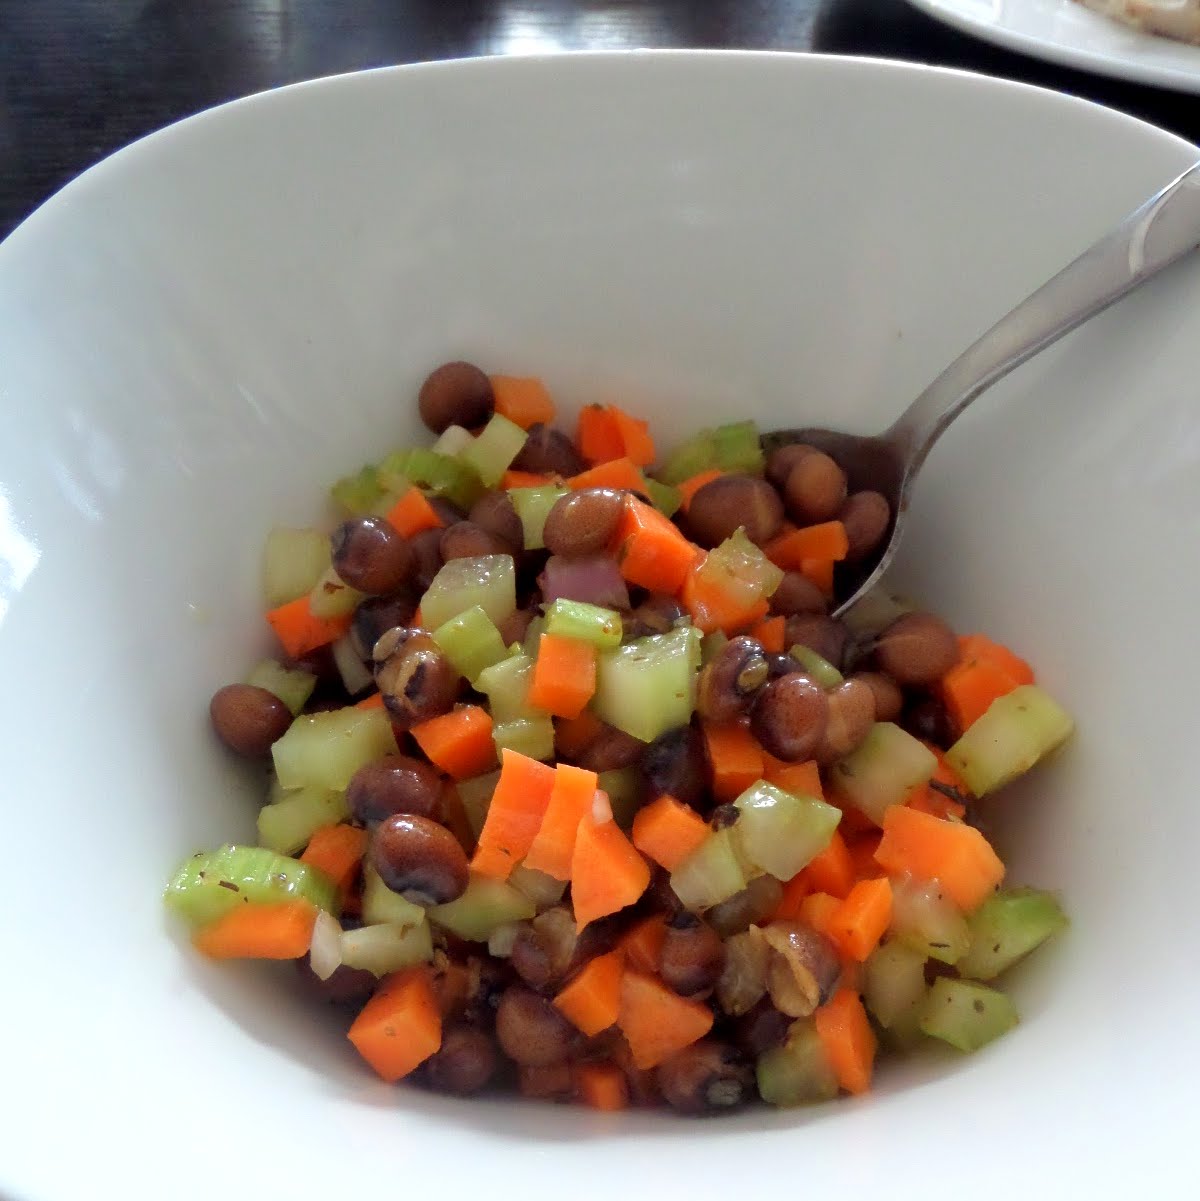 Pigeon Pea Salad:  A simple salad with pigeon peas and crunchy vegetables tossed in a lemon dressing.  Makes a great side dish or light lunch.